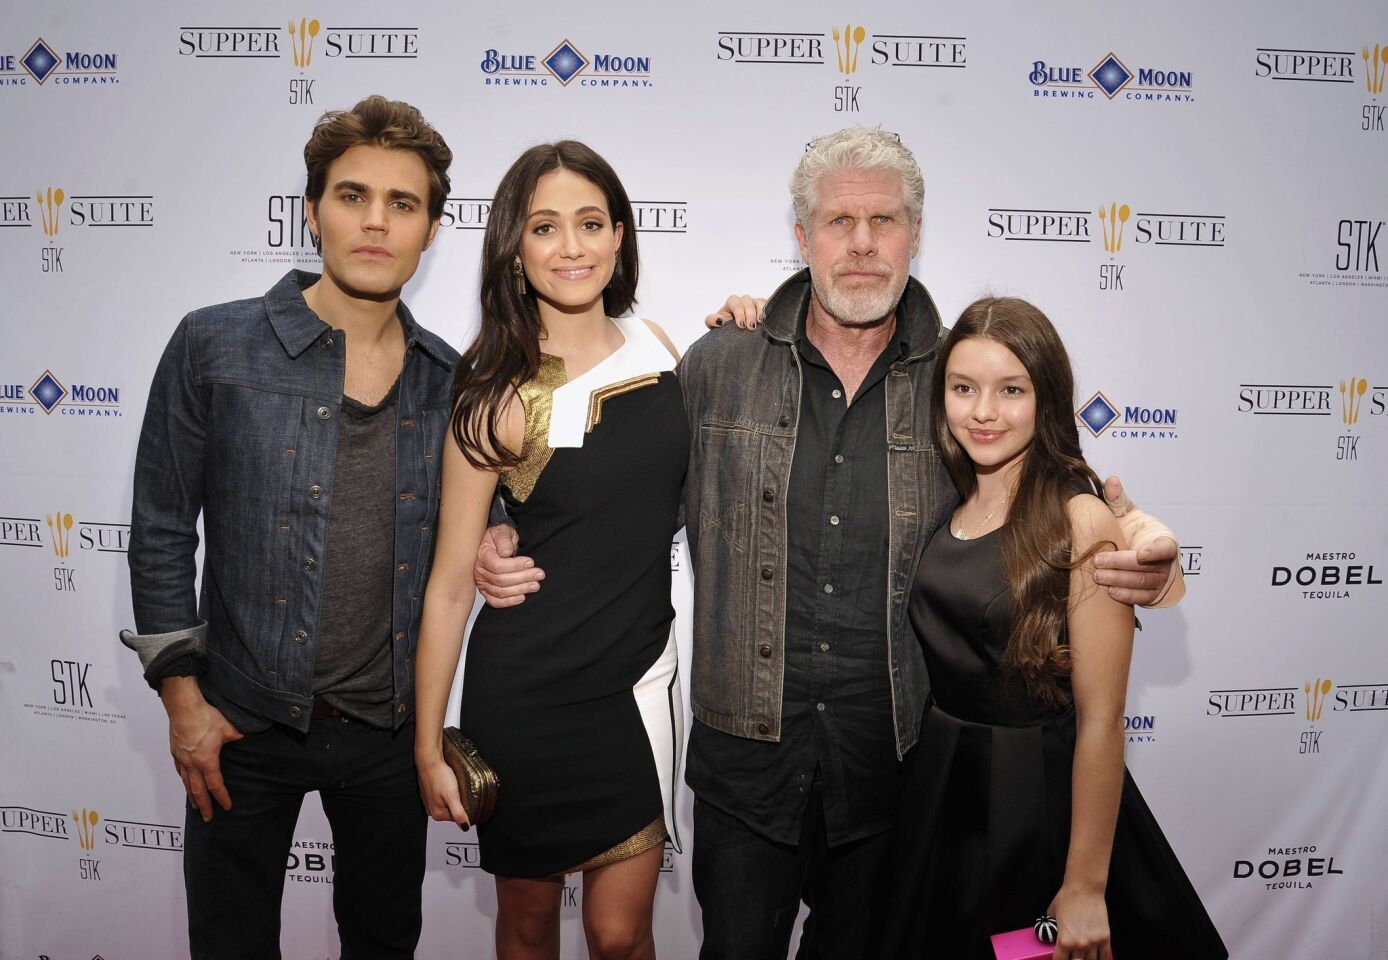 Posing on the red carpet during the "Before I Disappear" SXSW premiere party are, from left: Paul Wesley, Emmy Rossum, Ron Perlman and Fatima Ptacek.